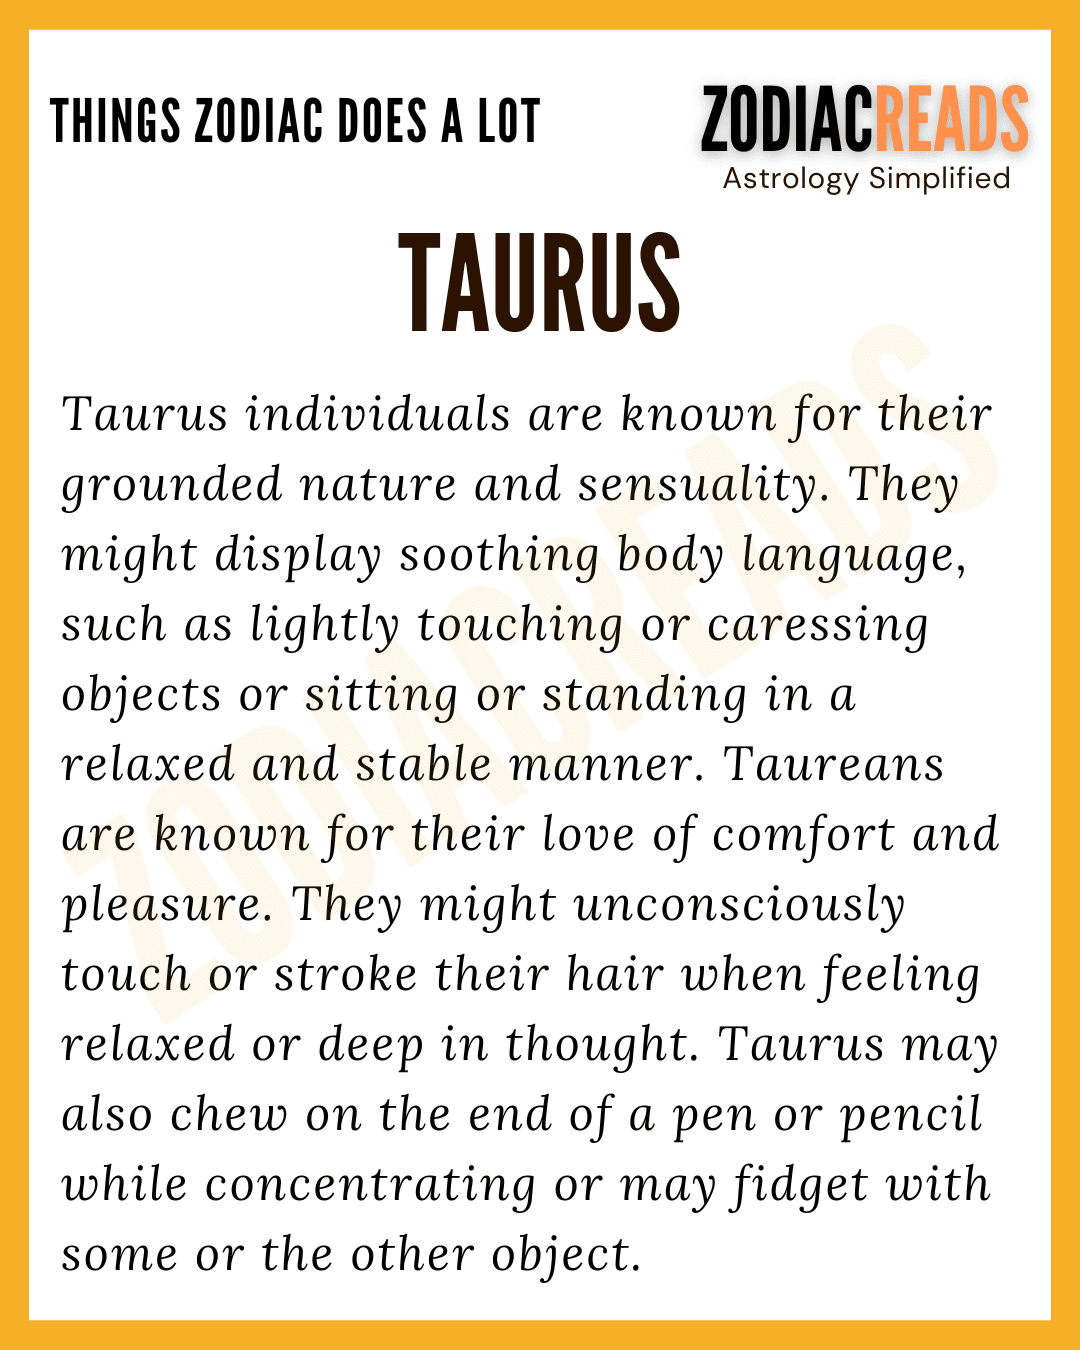 Taurus Things That Zodiac Signs Tend To Do A Lot